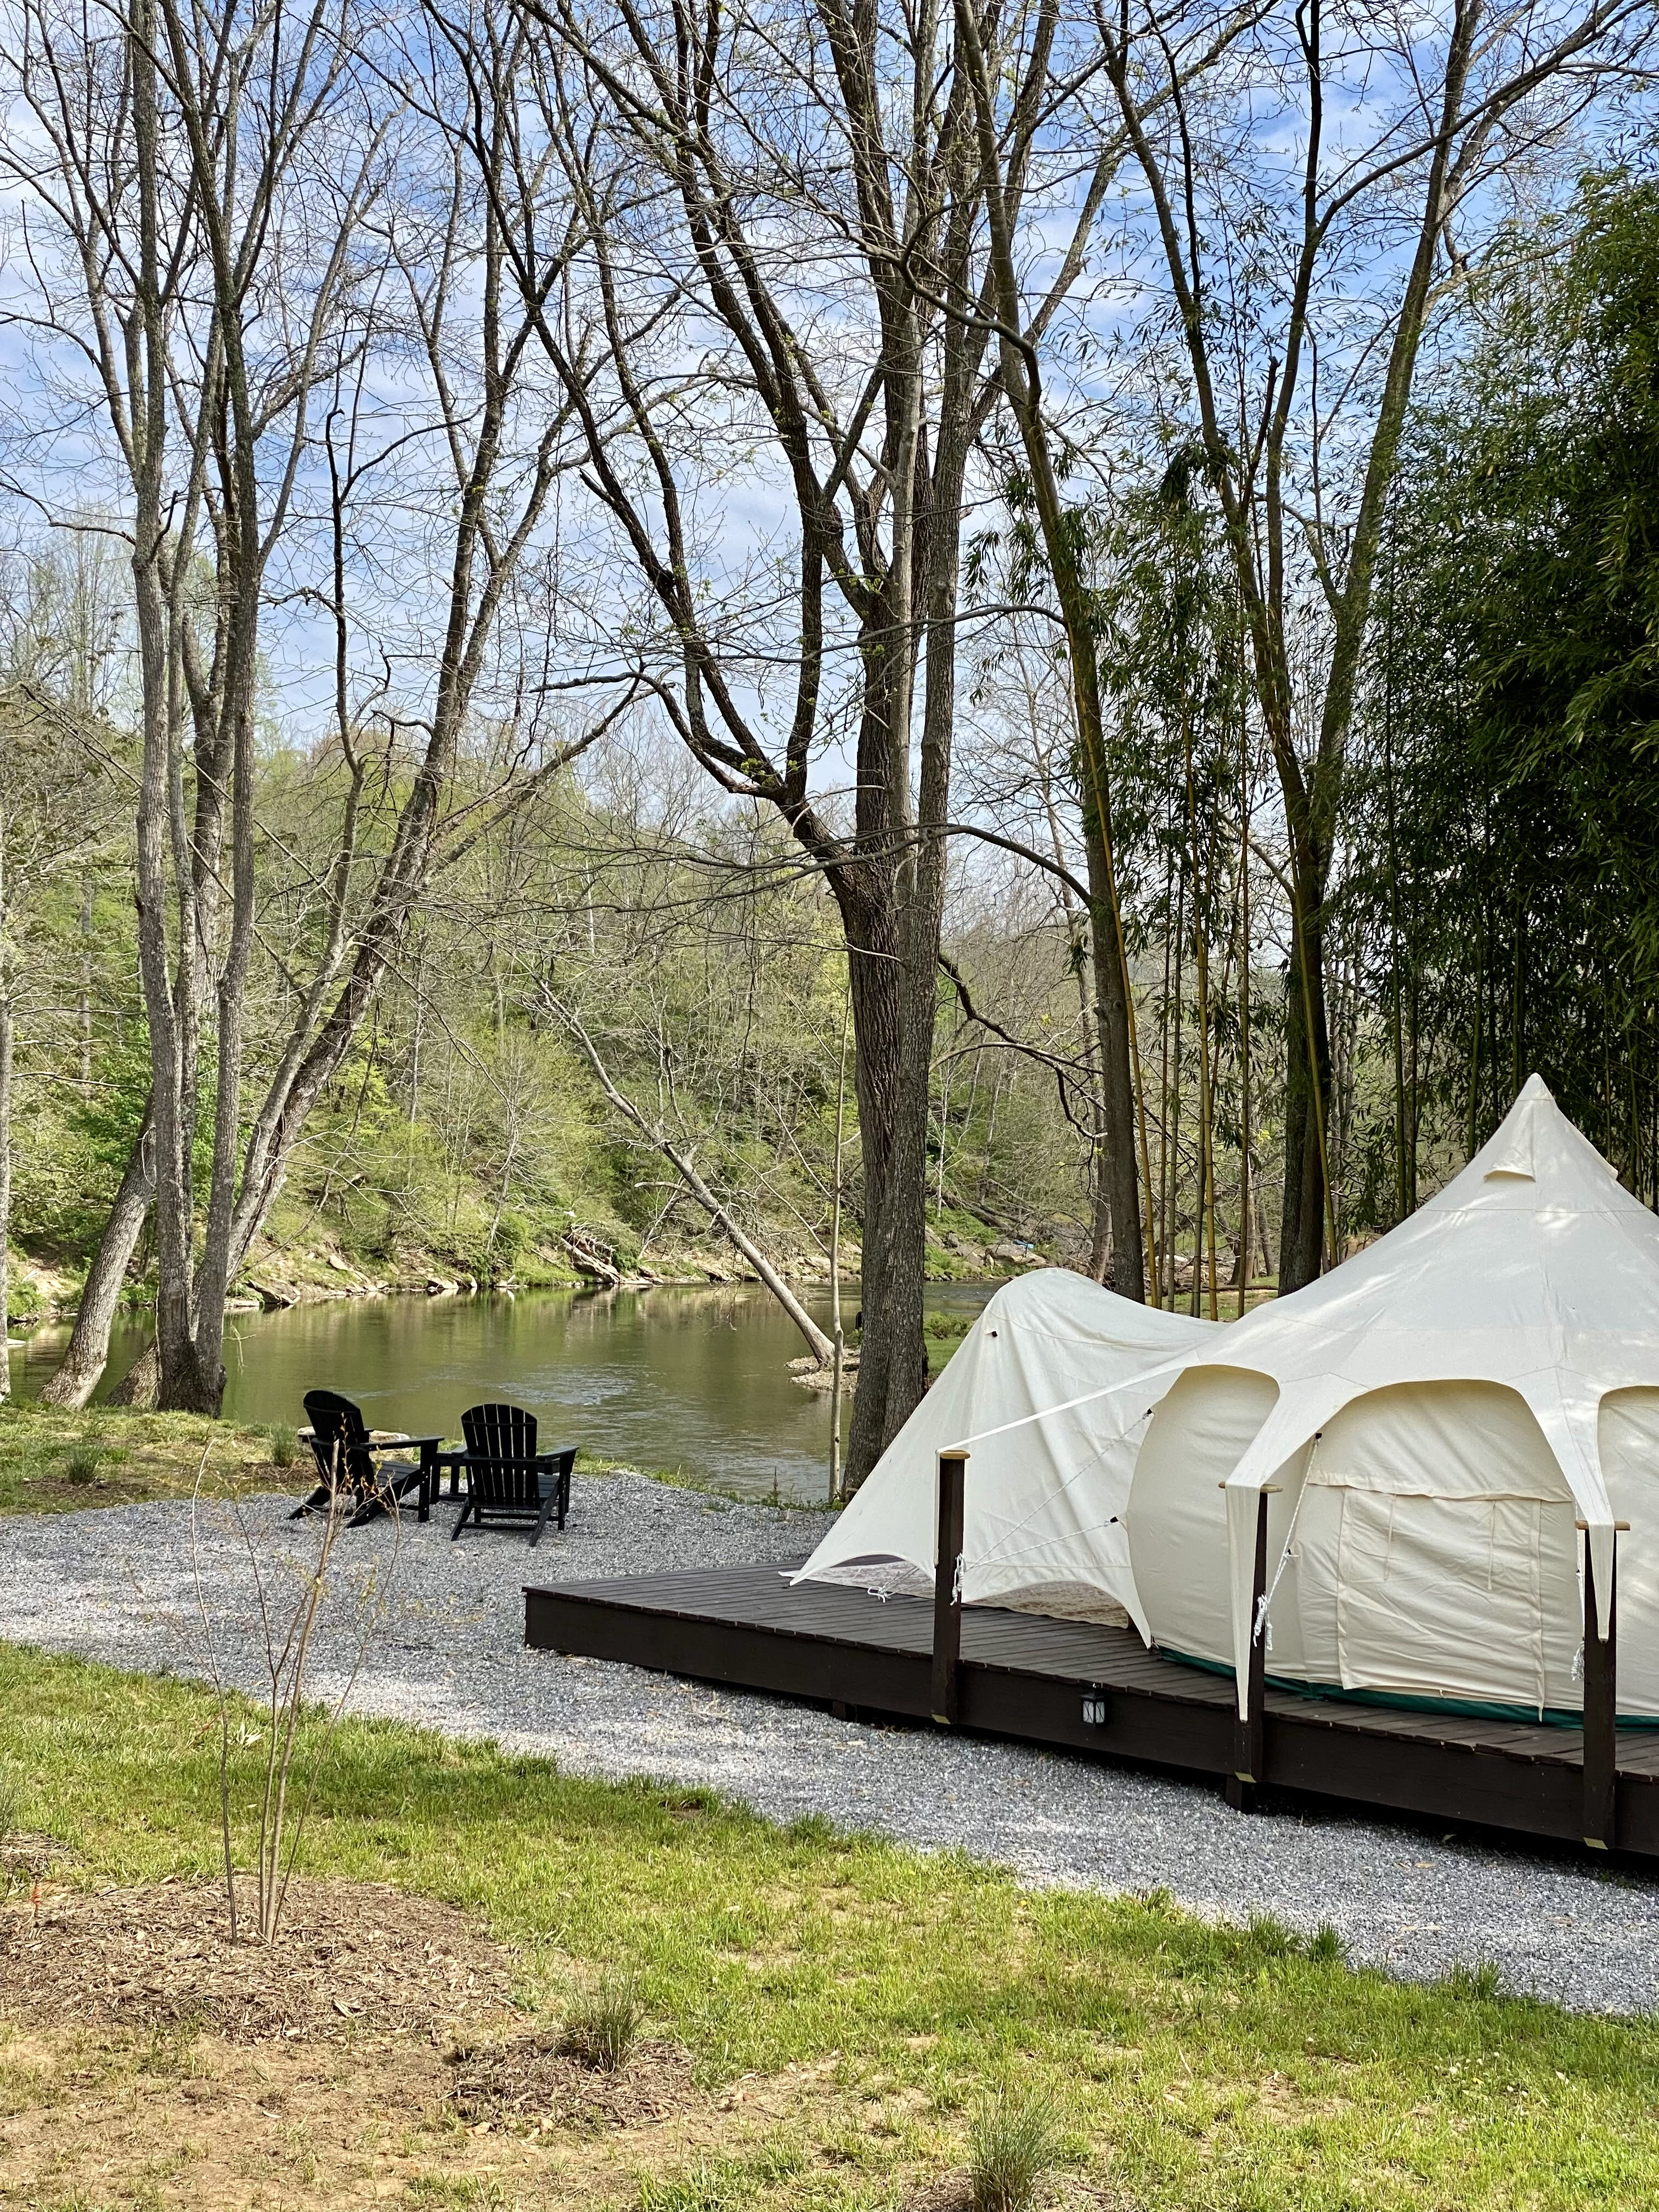 Riverviews, rushing water, cattle and birds set the stage for a great getaway!